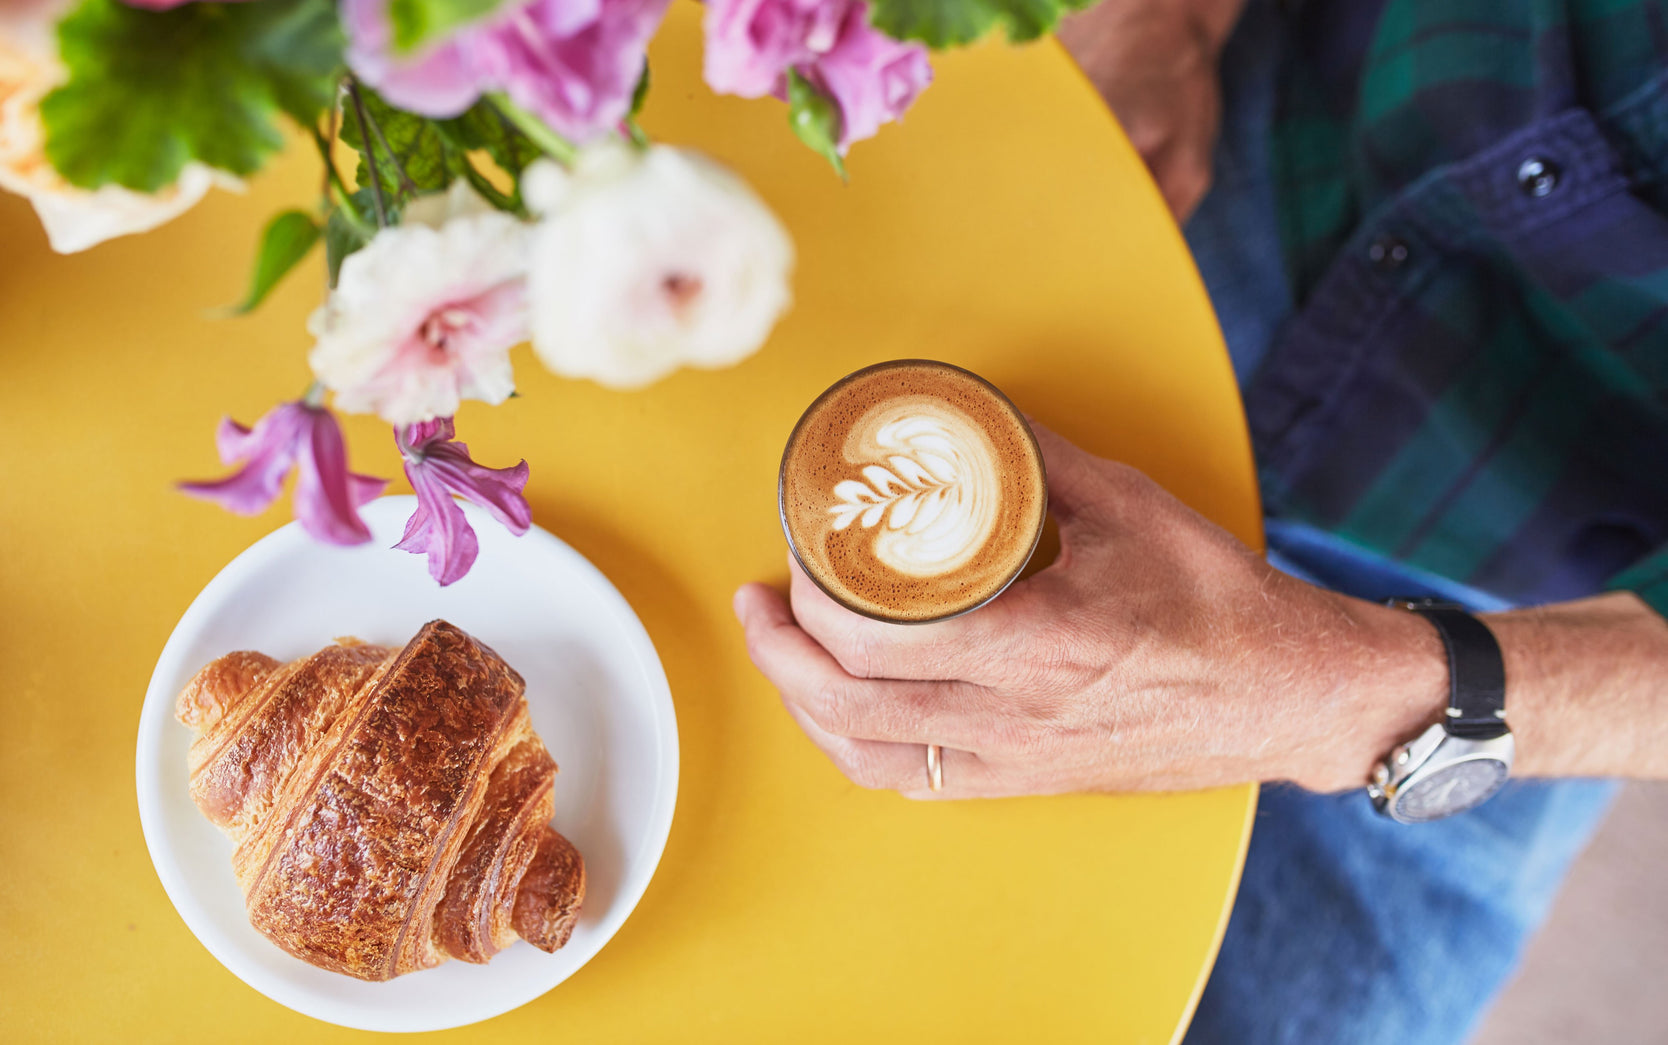 a person seated at a yellow table holding a gibraltar with rosetta latte art. a croissant on a plate sits at the table as well.